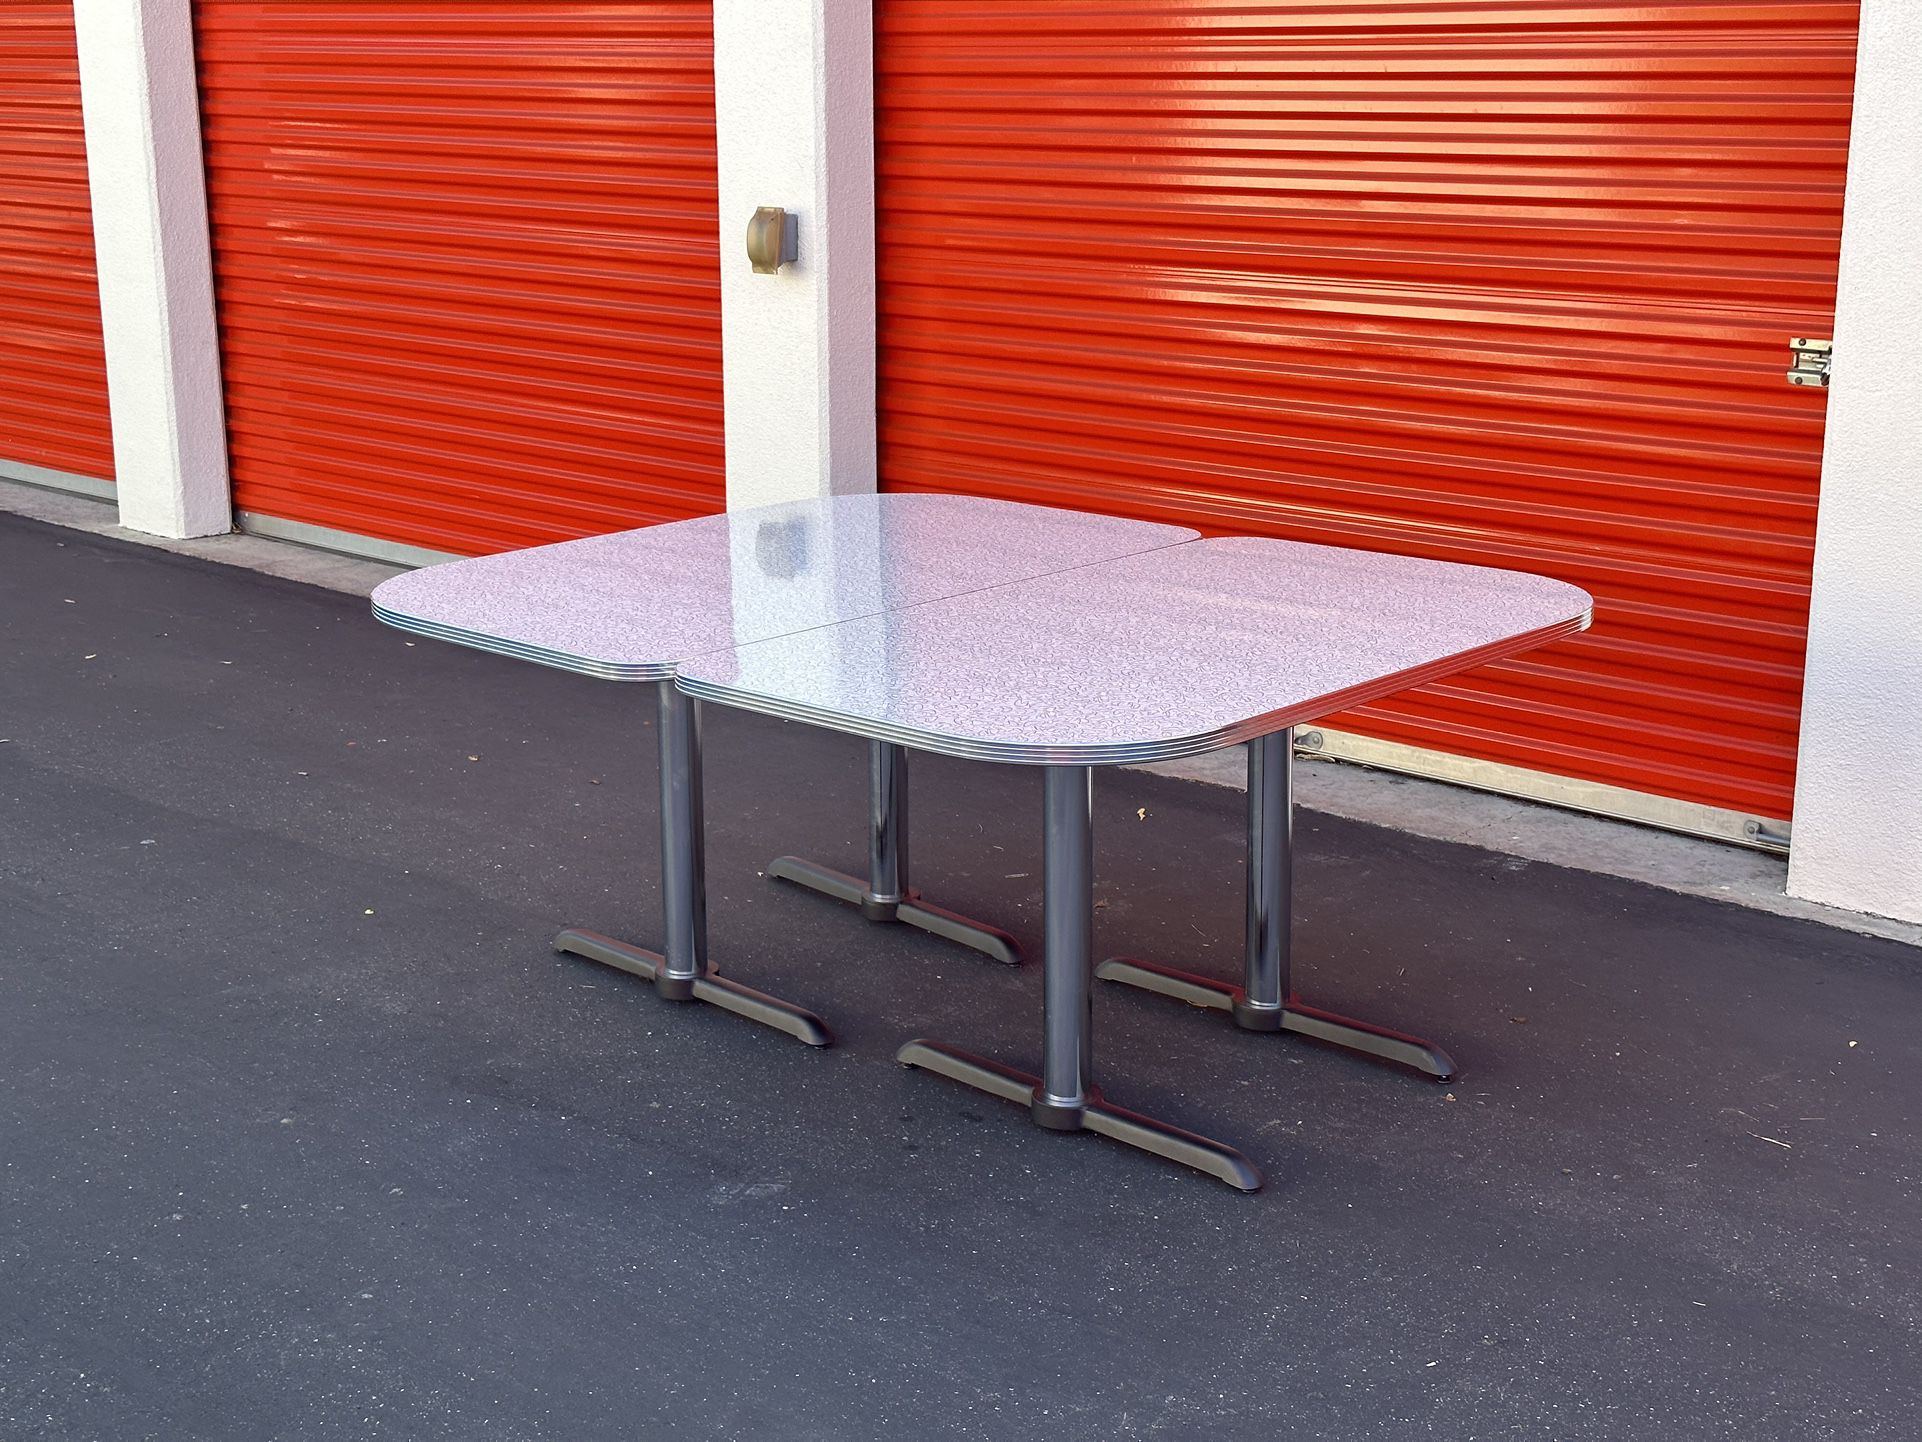 FREE DELIVERY -Vintage Retro Diner Restaurant Style Dinning Tables  -White-Retail $1.6k